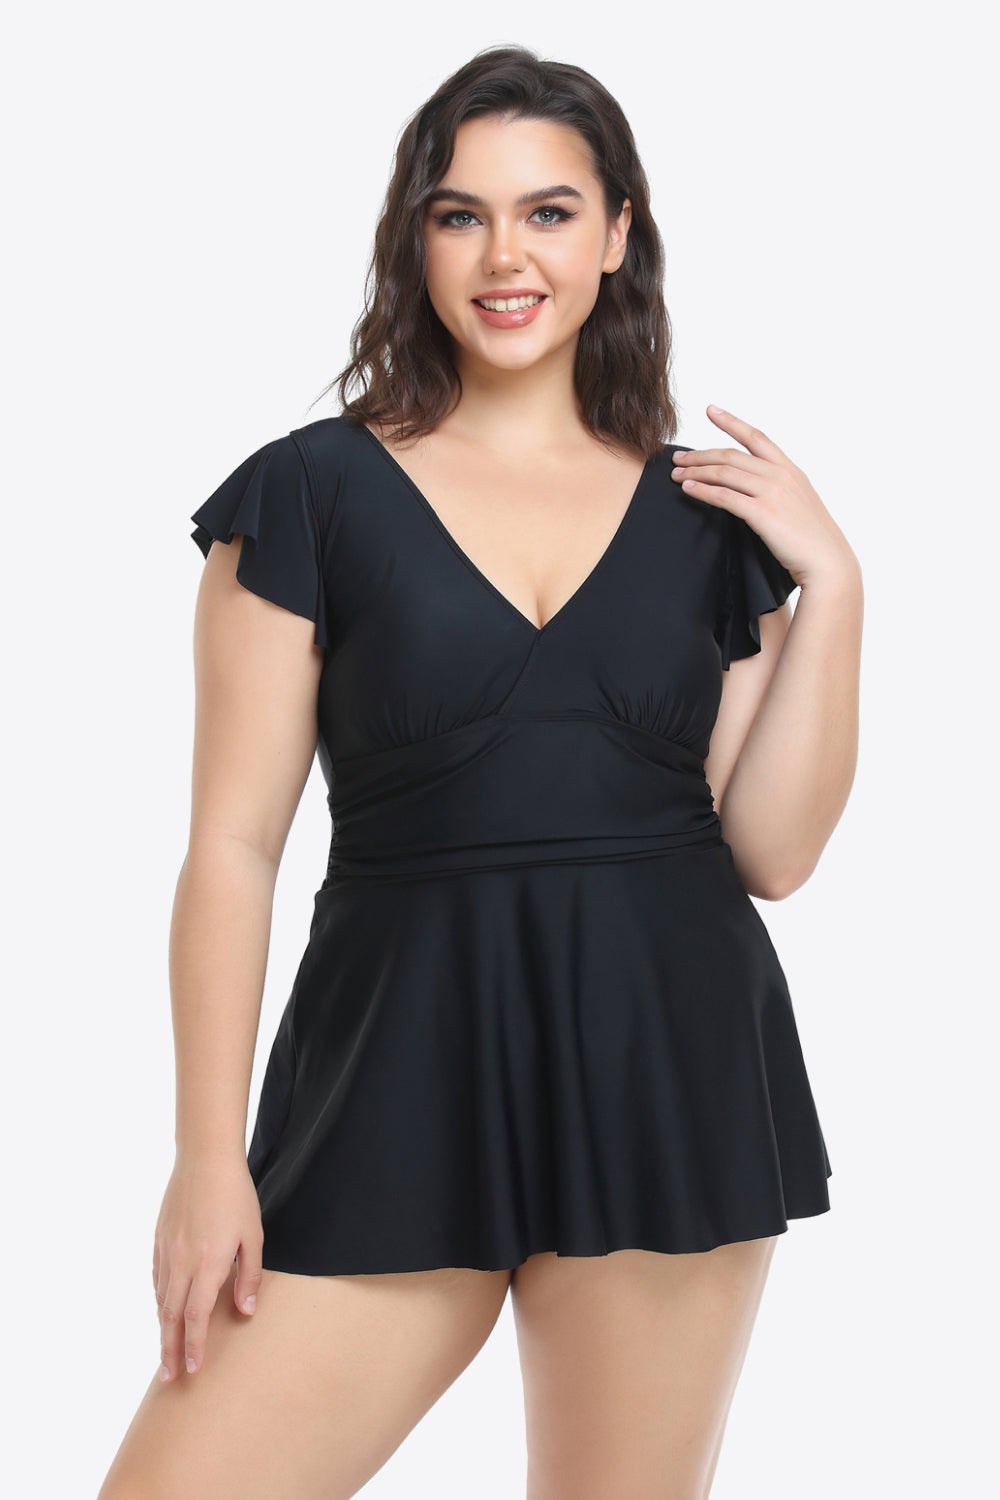 Elegant Plus Size Beach Wedding Guest Dress - Ruffled Plunge Swim Dress and Bottoms Set for Stylish and Comfortable Summer Celebrations